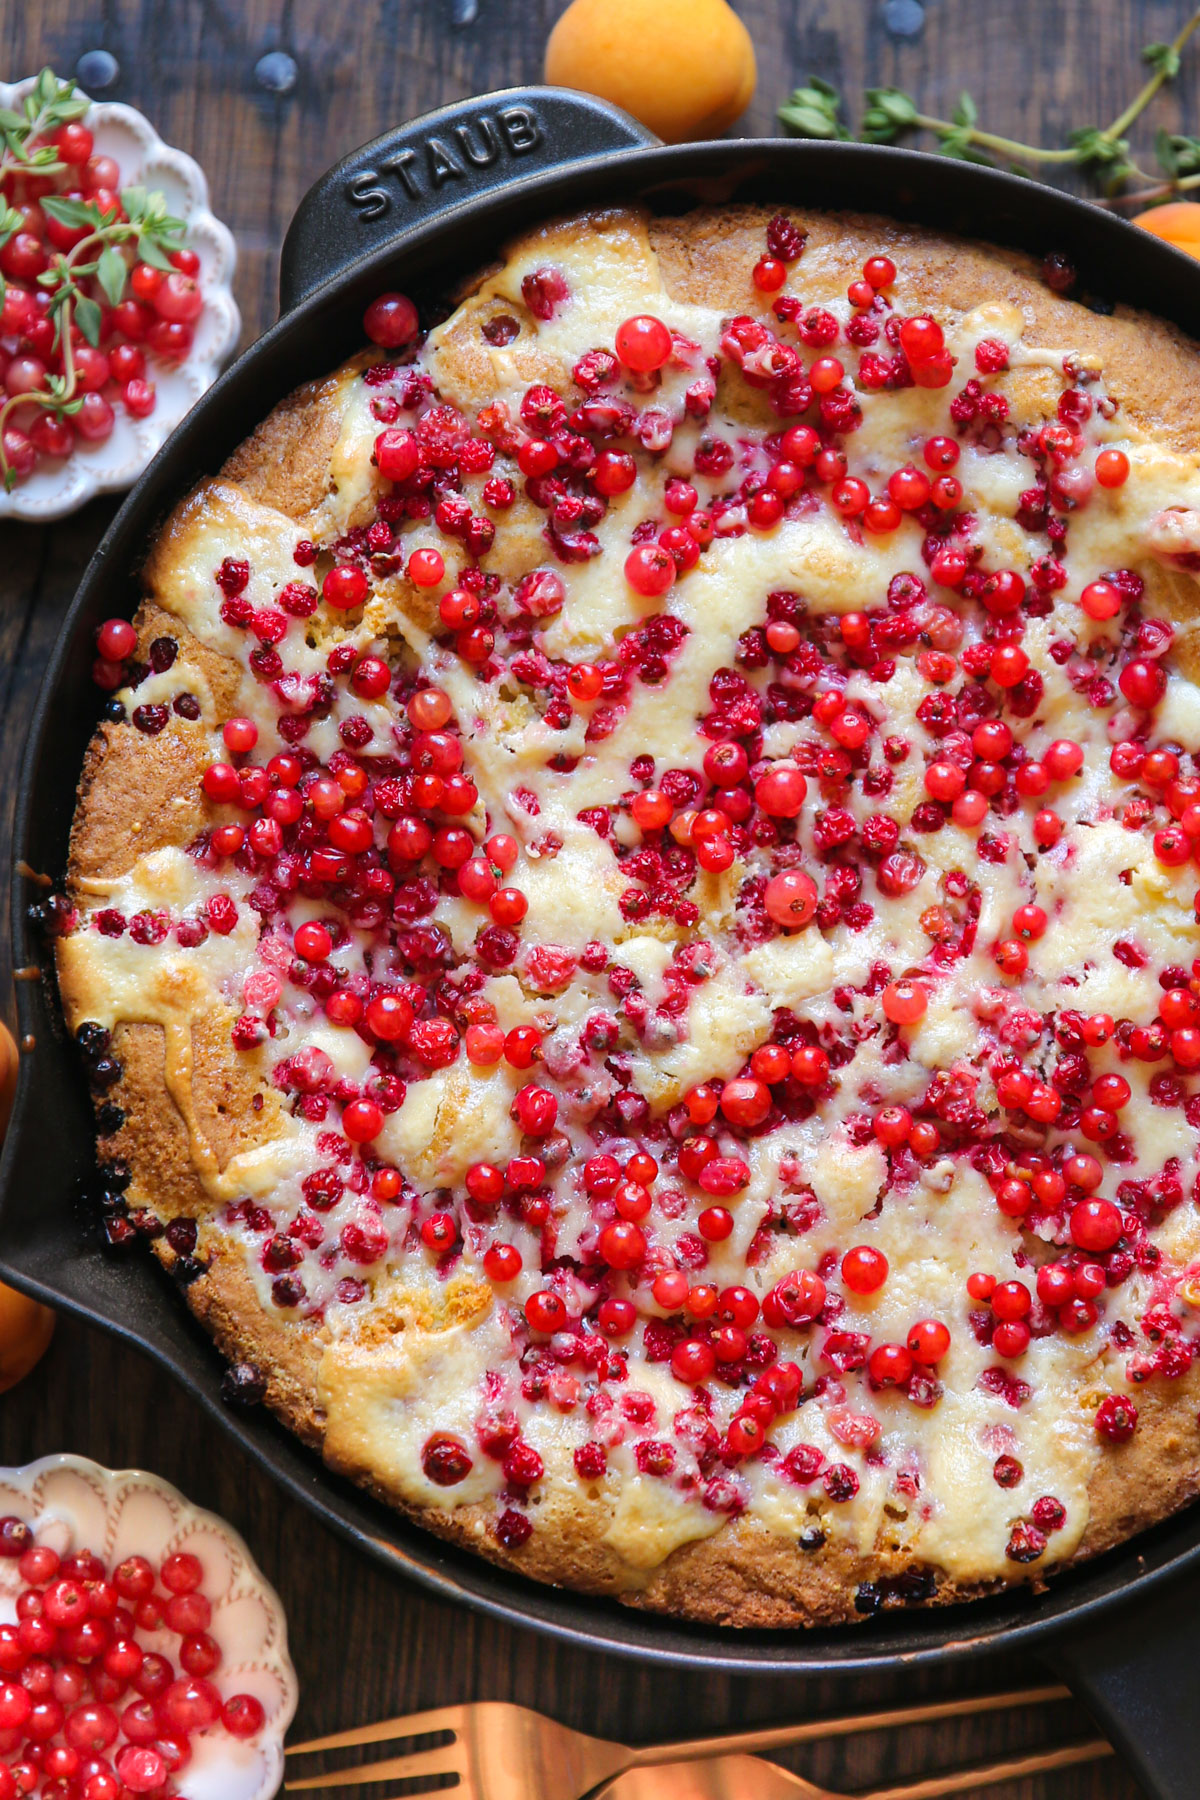 Baked Red Currant Cake with Cream Cheese Filling - in a cast iron skillet.